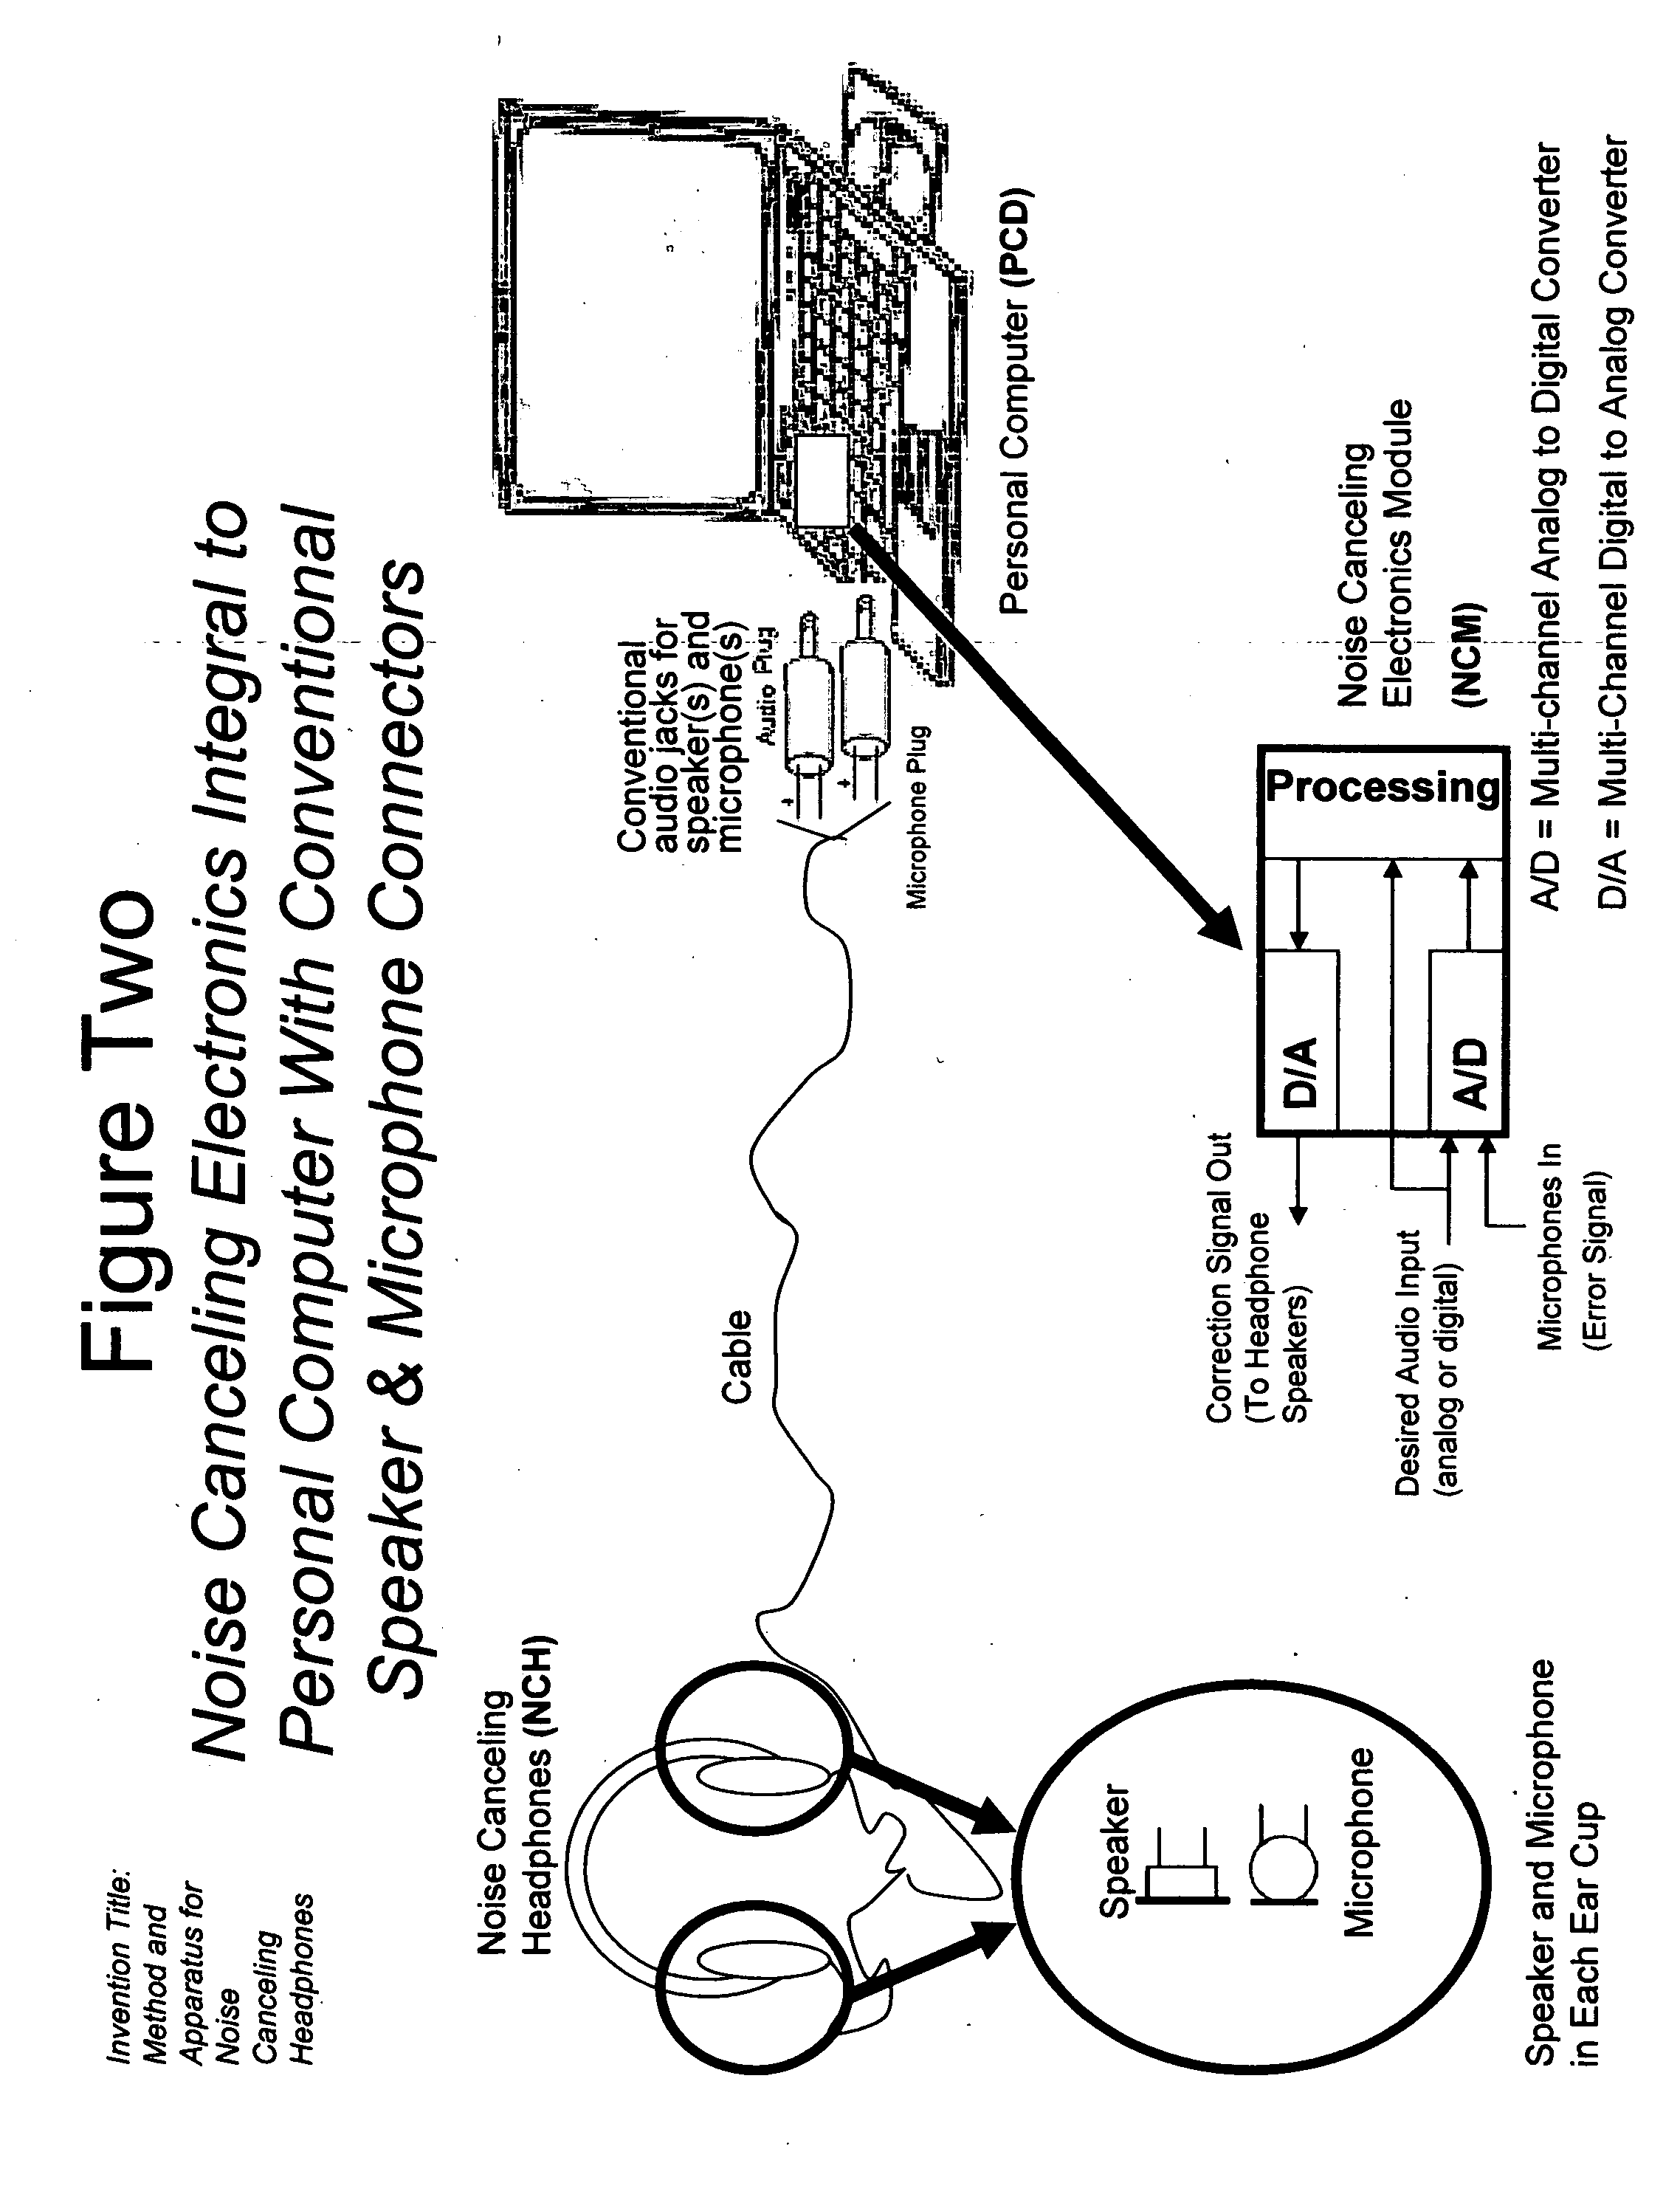 Method and apparatus for noise canceling headphones